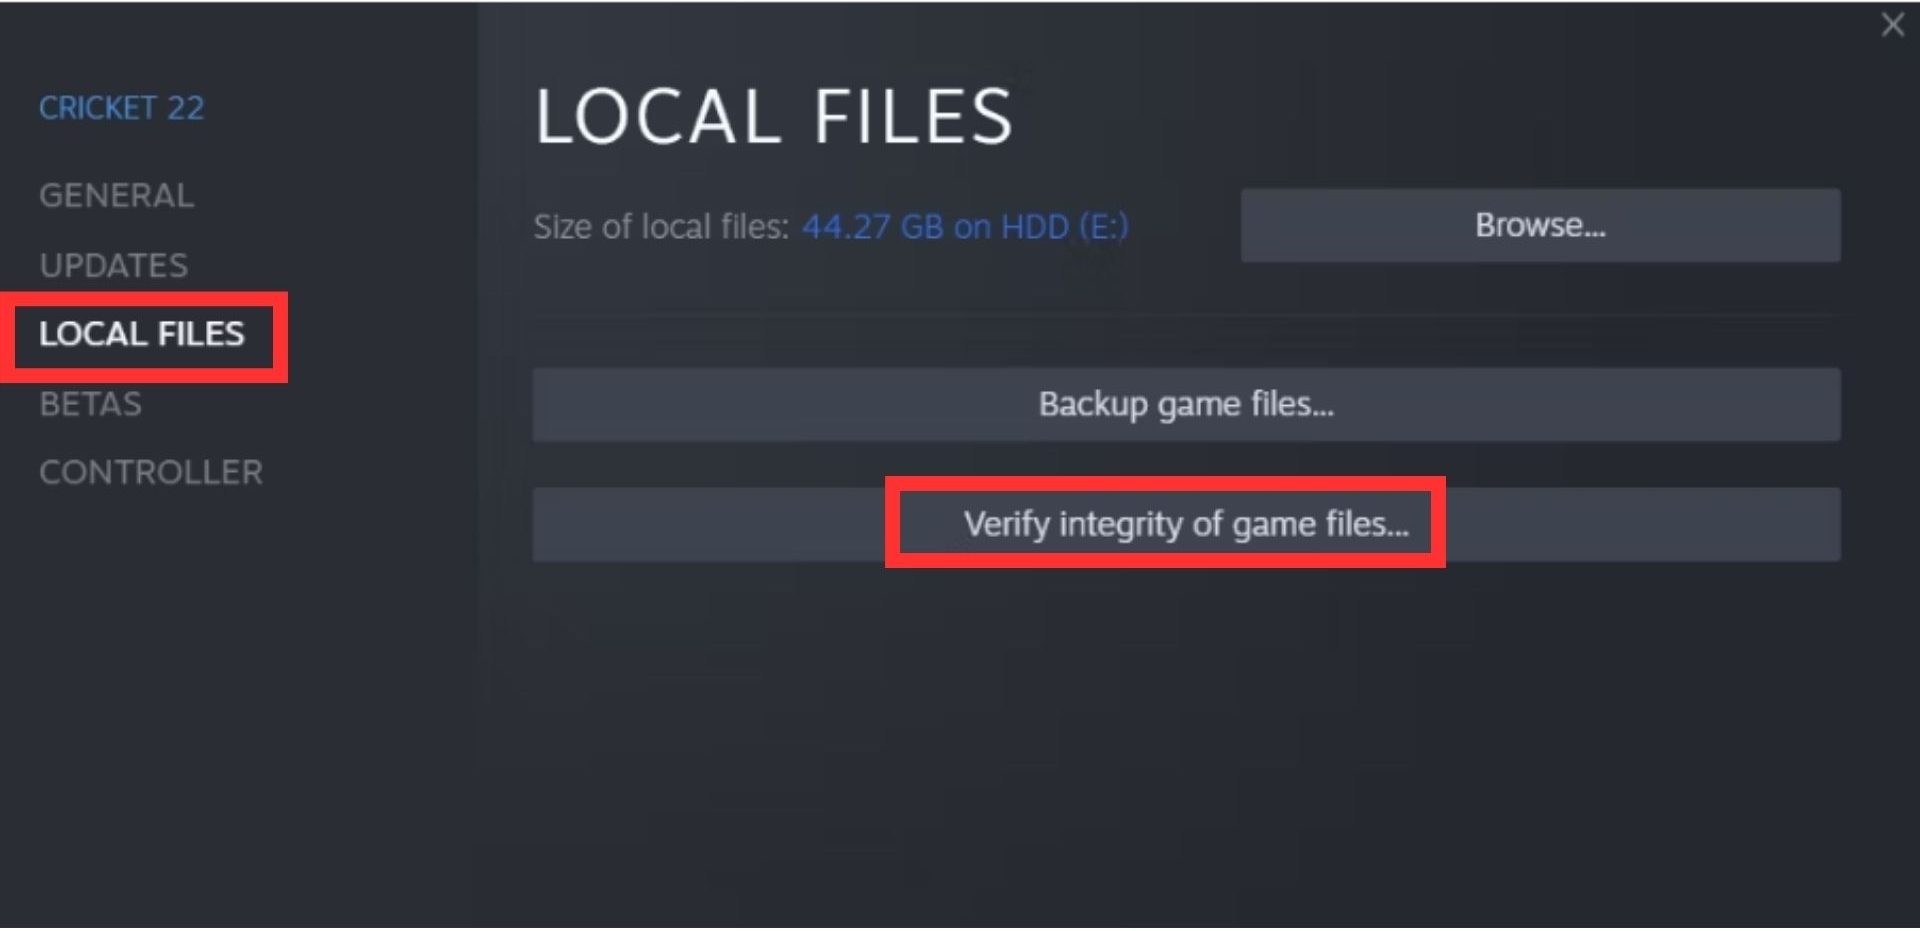 Local Files: Verify integrity of game files.